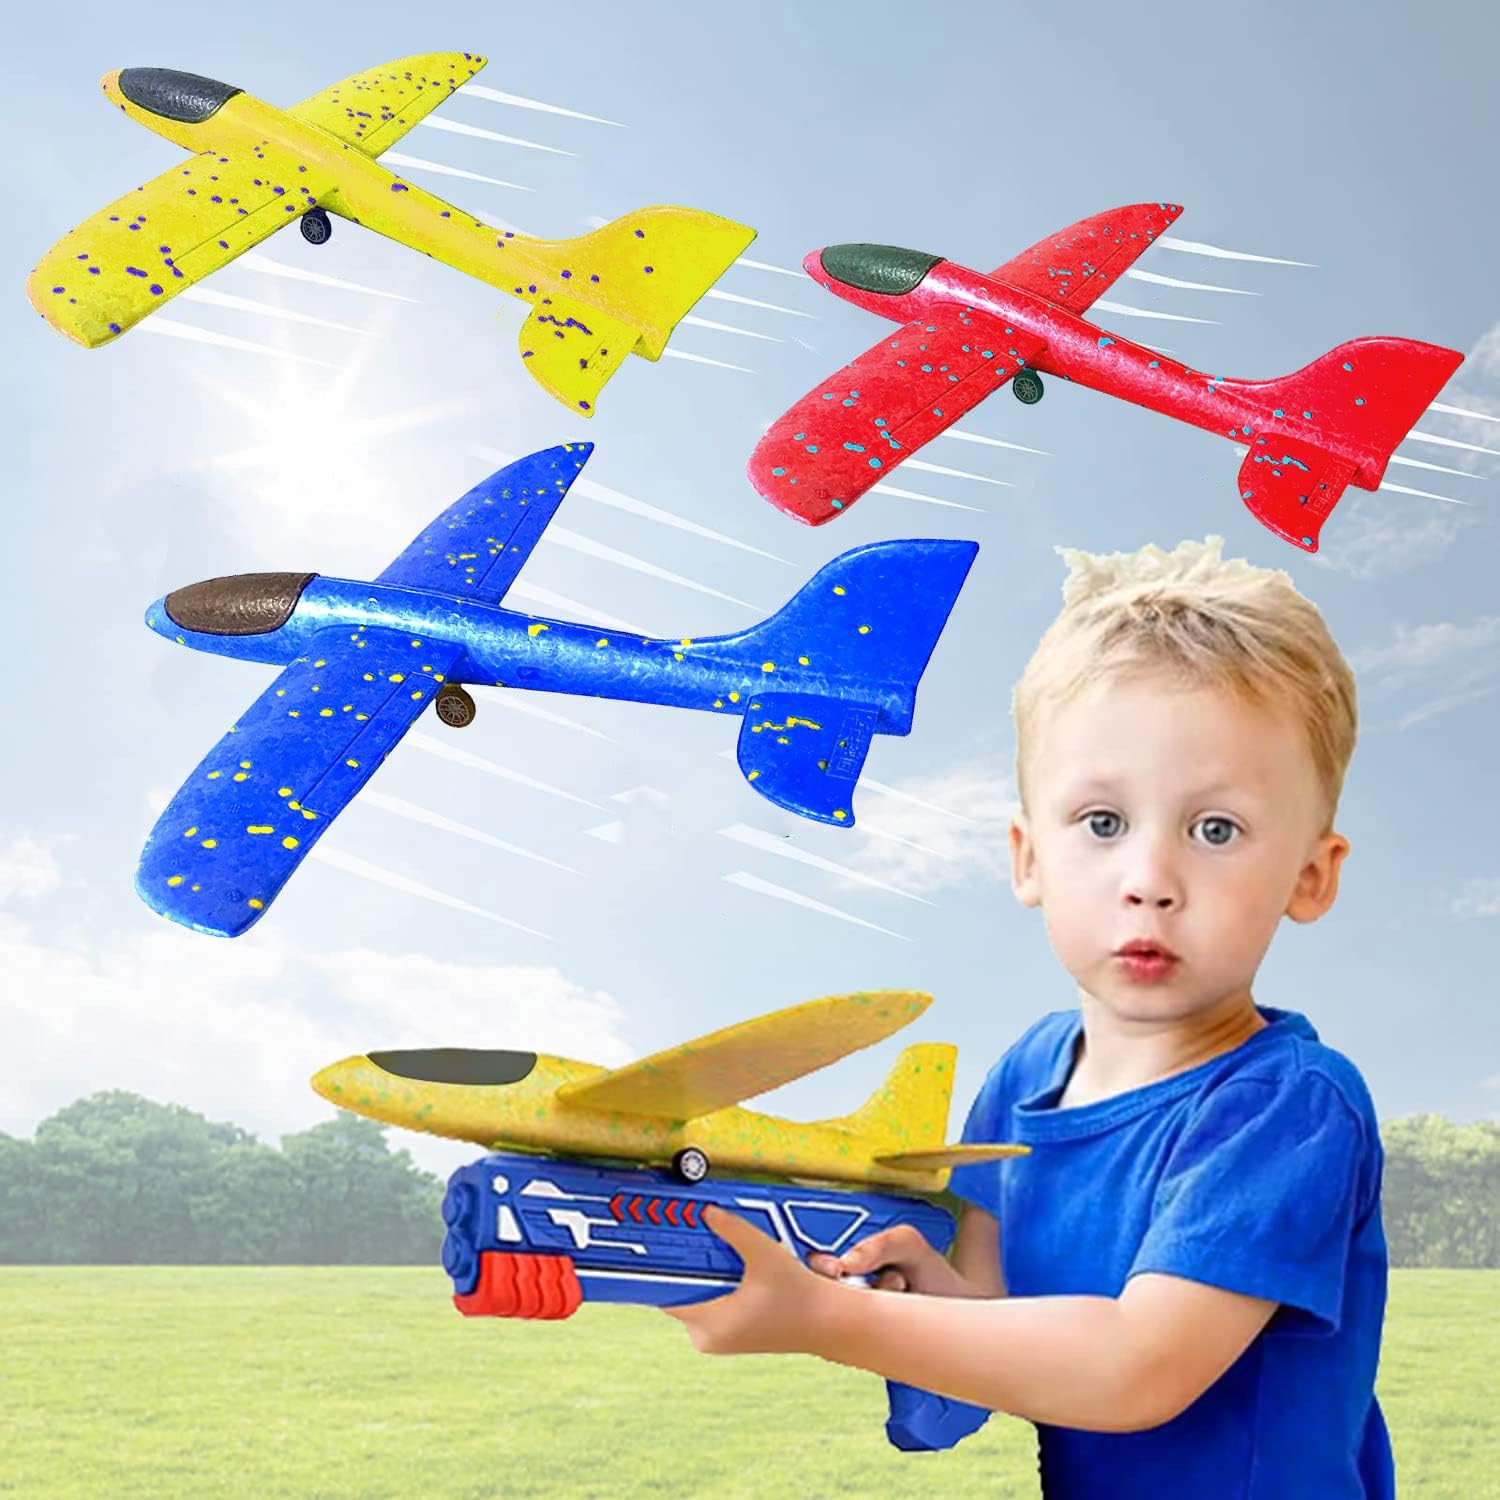 CAZOS Airplane Launcher Toy - 3 Pack Foam Glider Plane Throwing Aeroplane Toys for Outdoor Game Flying Toys Birthday Gifts for Age 4 5 6 7 8 9 10 11 12 Kids Boys Girls